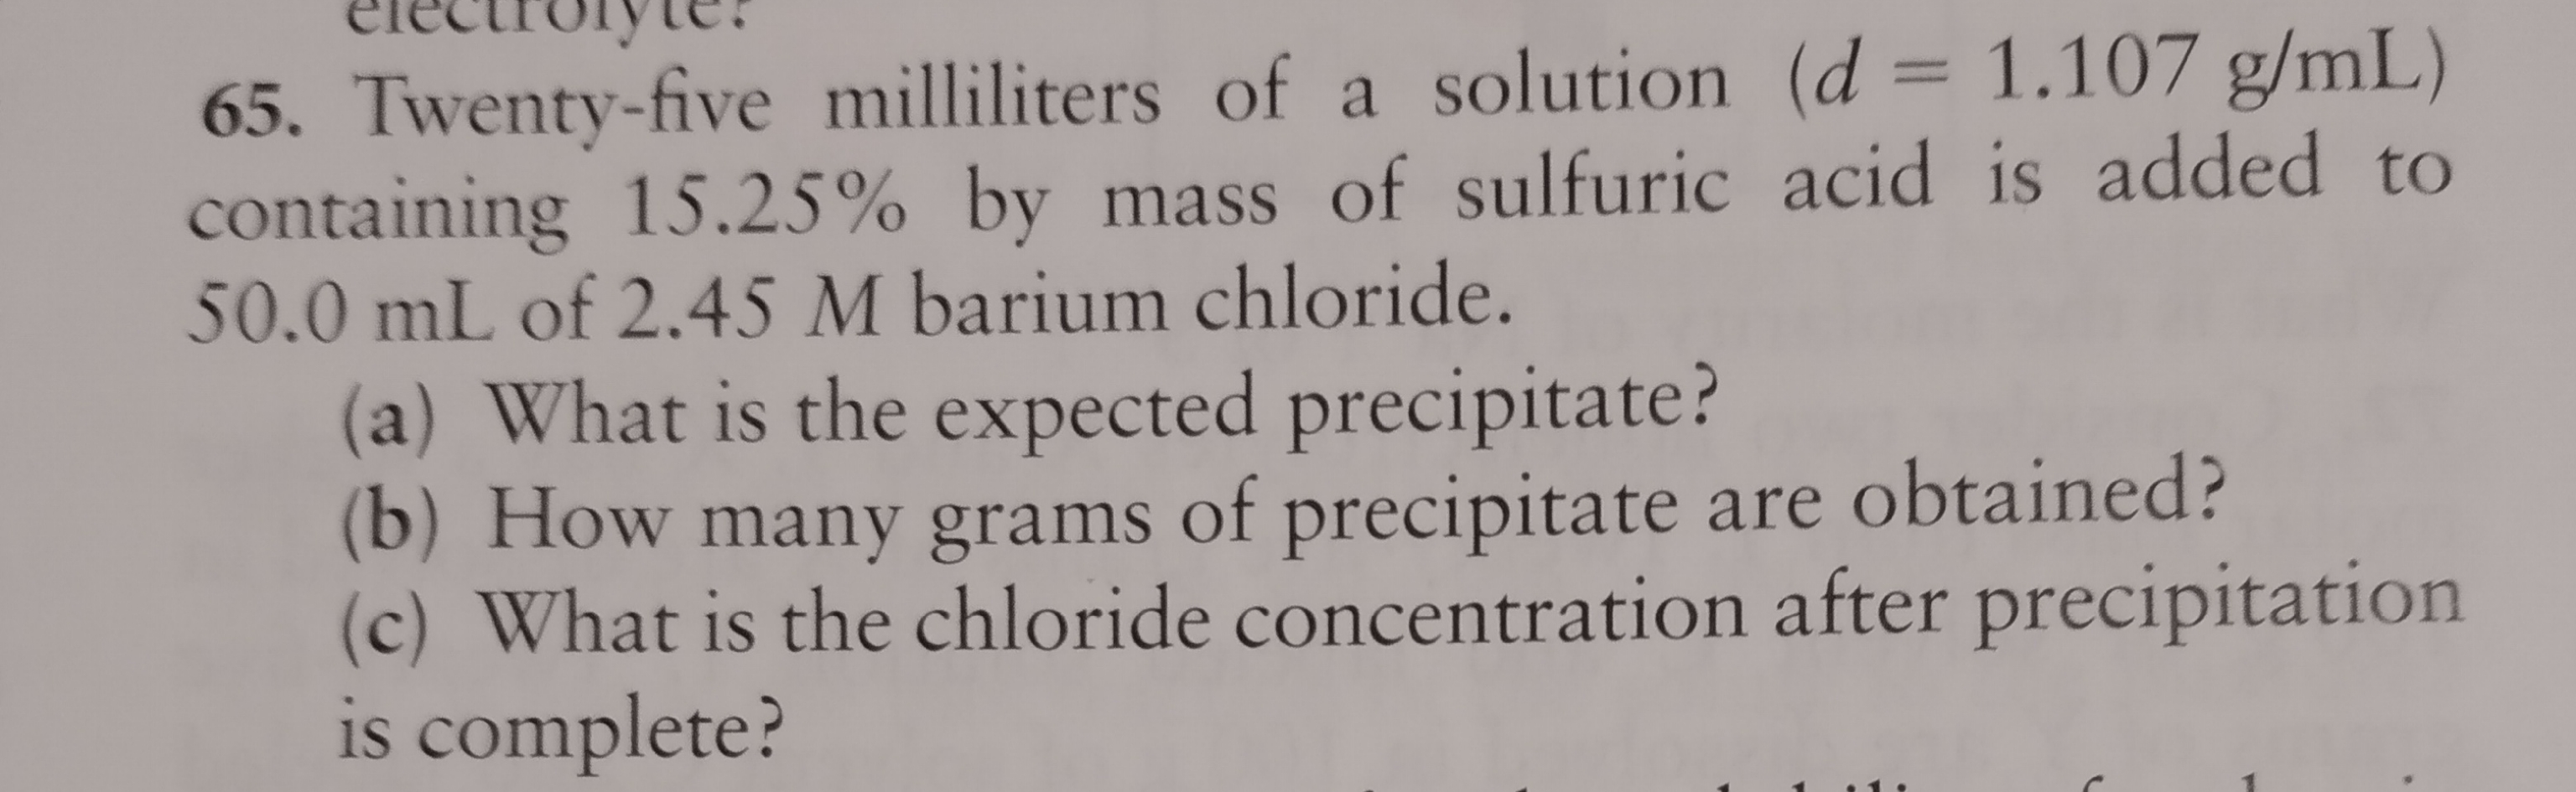 electiolyte.
65. Twenty-five milliliters of a solution (d = 1.107 g/mL)
containing 15.25% by mass of sulfuric acid is added to
50.0 mL of 2.45 M barium chloride.
(a) What is the expected precipitate?
(b) How many grams of precipitate are obtained?
(c) What is the chloride concentration after precipitation
is complete?
